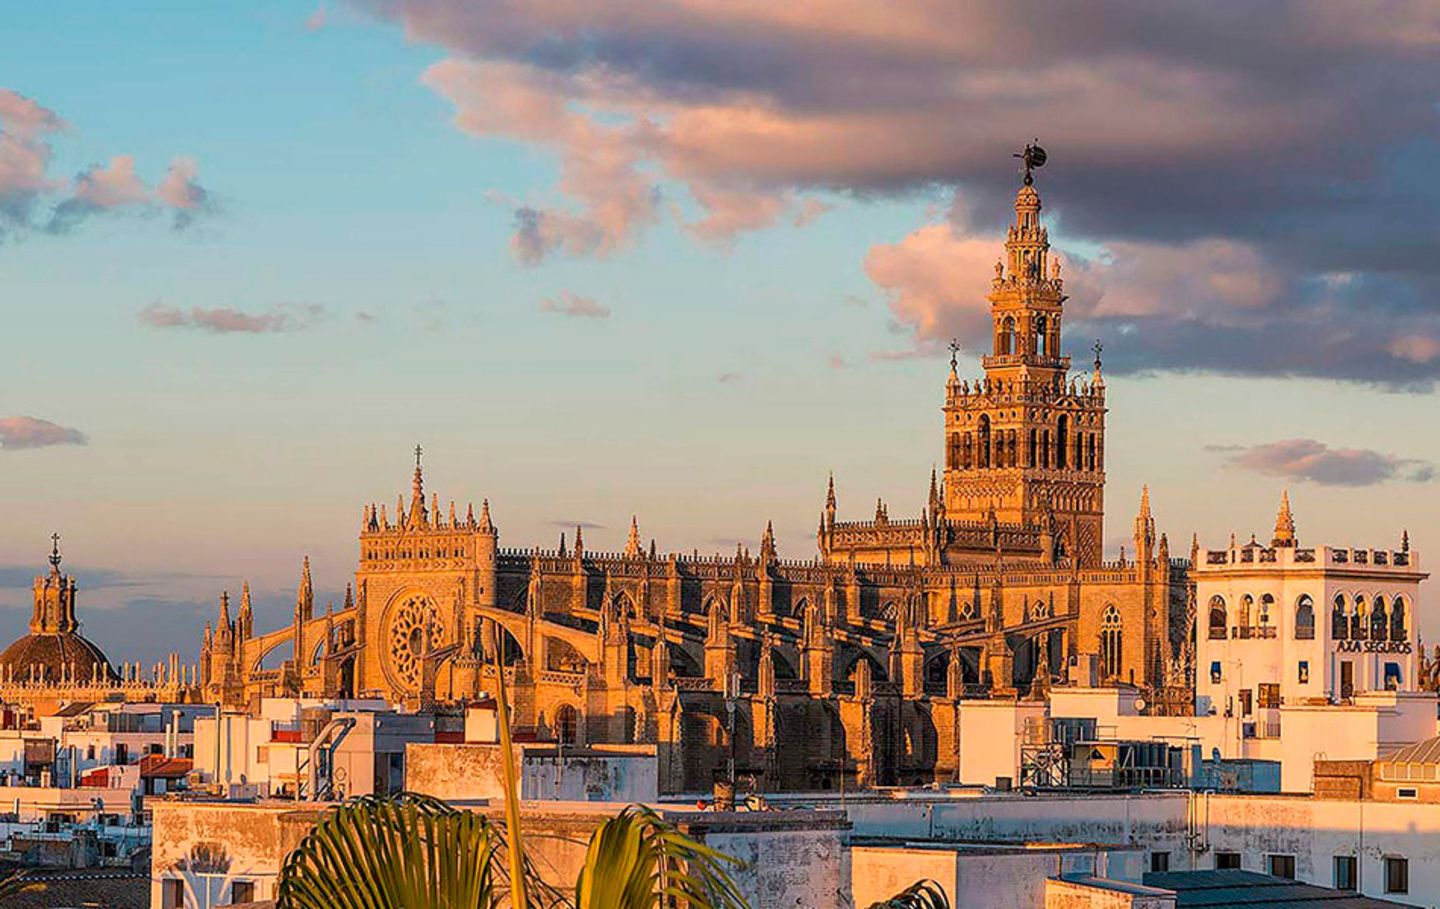 Discover La Giralda and the Cathedral of Seville